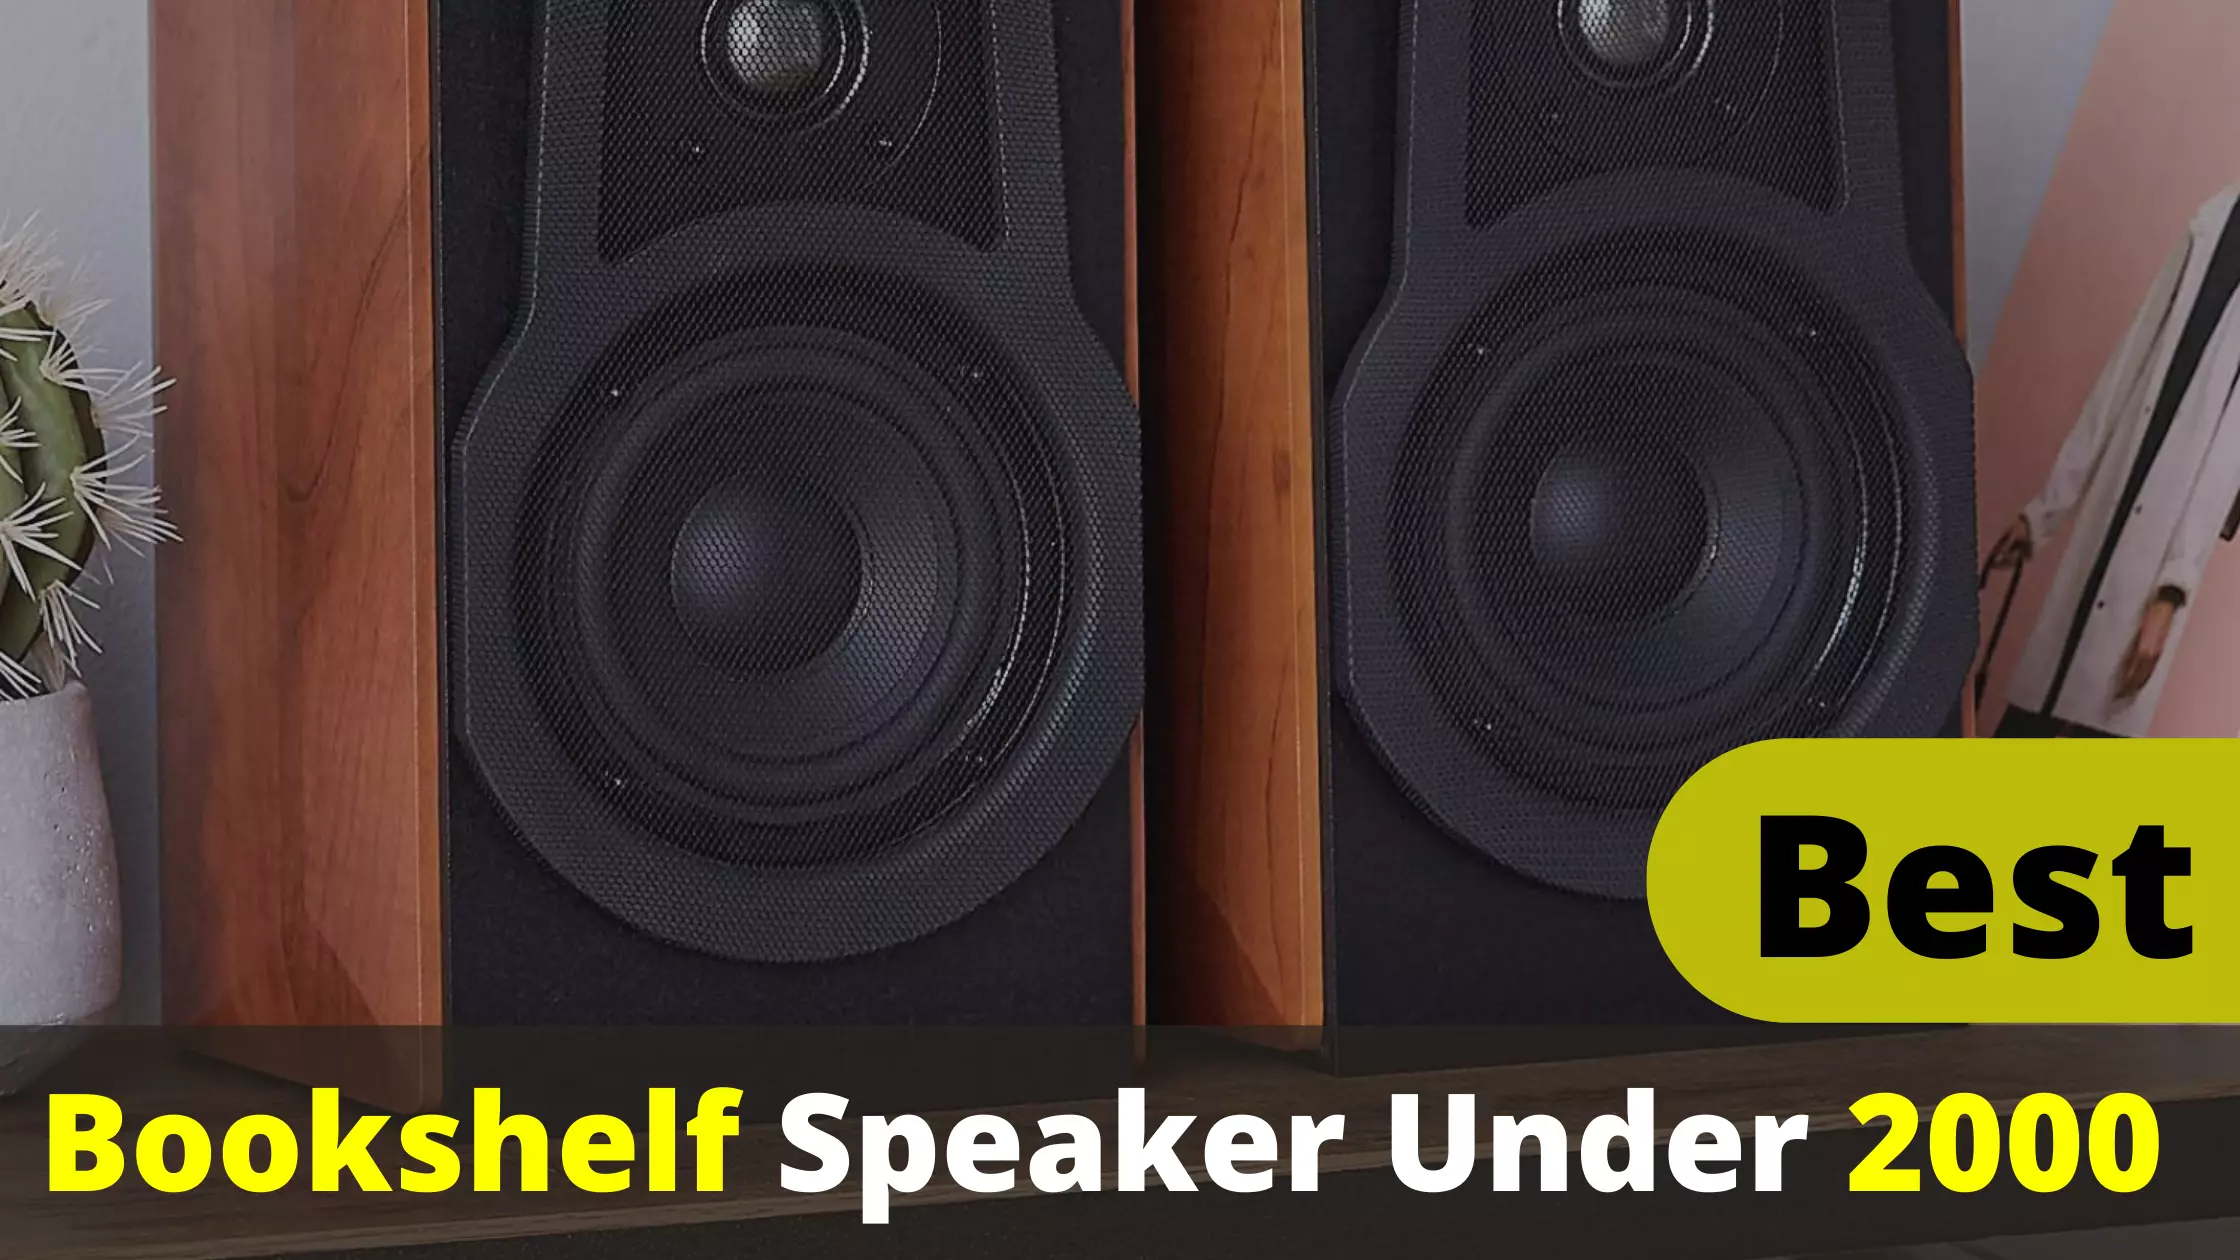 Best Book Shelf Speakers Under $2000 Experts Review